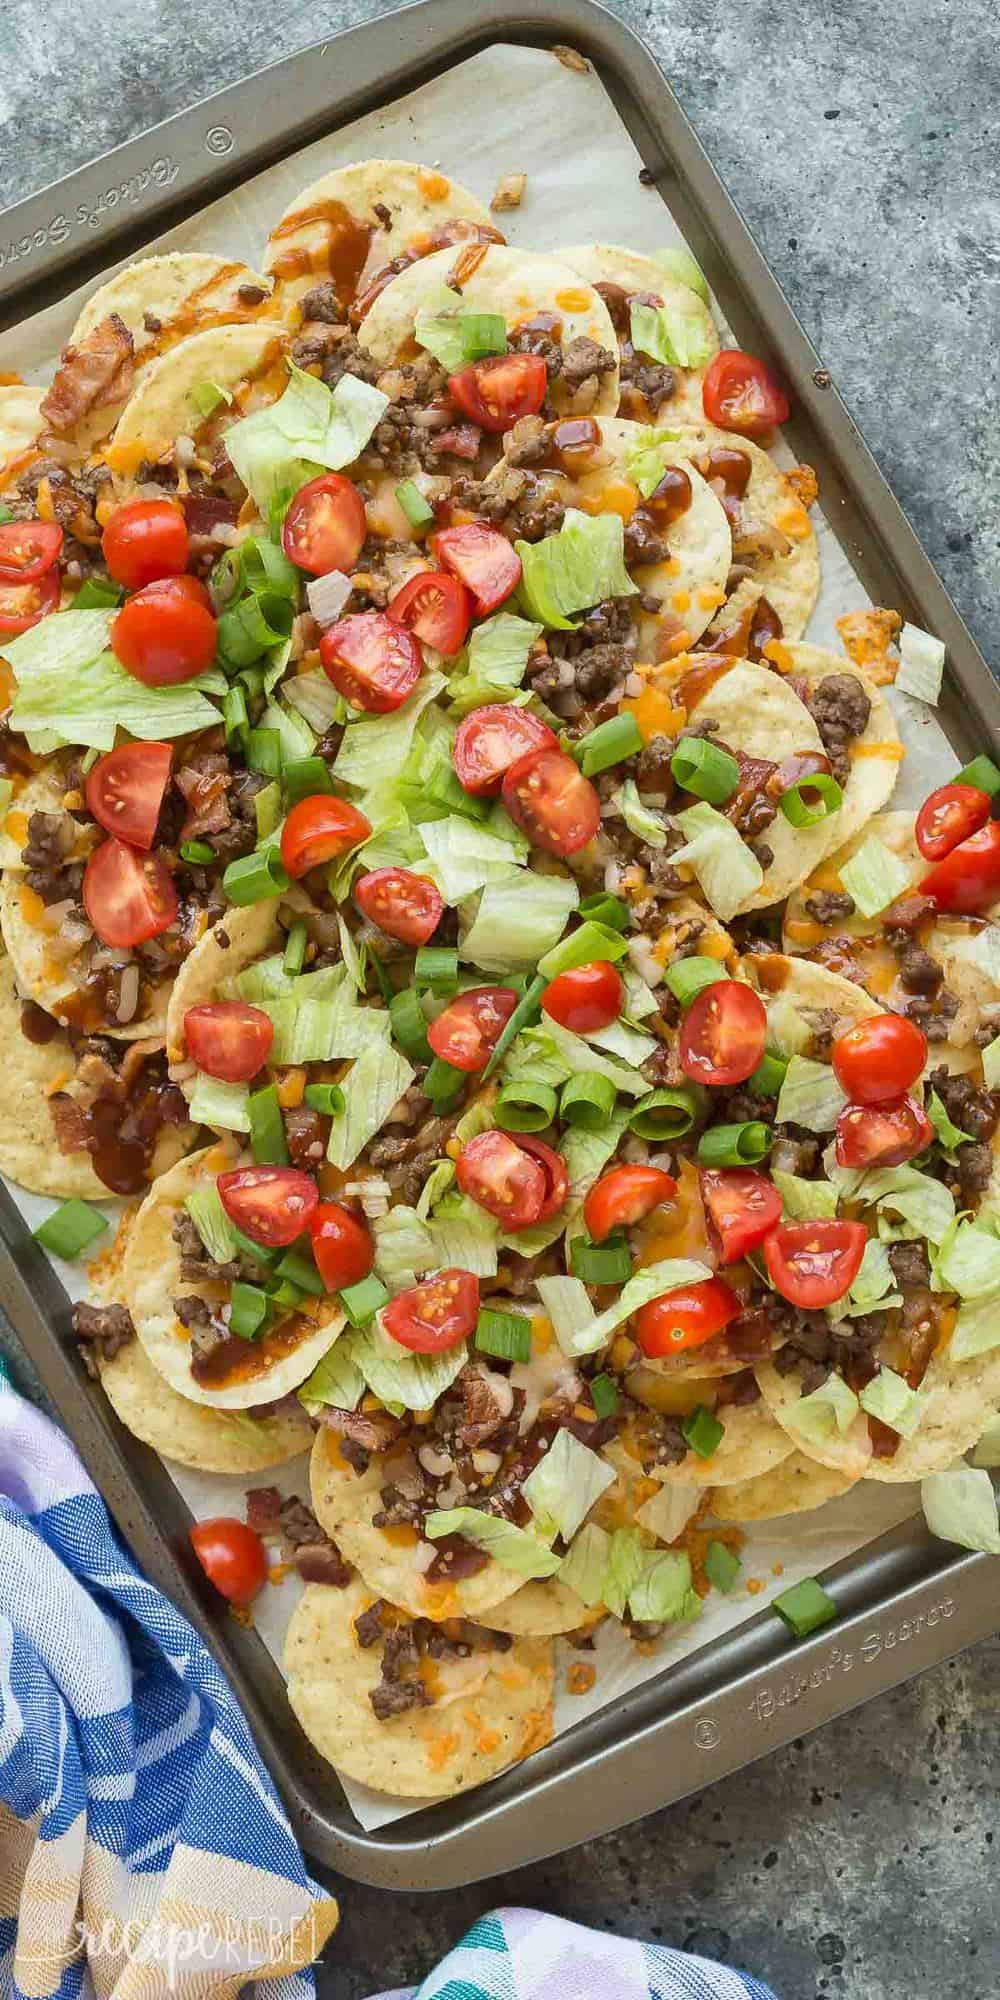 BBQ Bacon Cheeseburger Nachos are the best BBQ nachos you've ever had! Barbecue sauce, ground beef, bacon, cheddar cheese, green onions and all the burger toppings you want. Perfect for movie night or game day! Includes step by step RECIPE VIDEO. #nachos #appetizer #groundbeef #beef #recipe #recipes